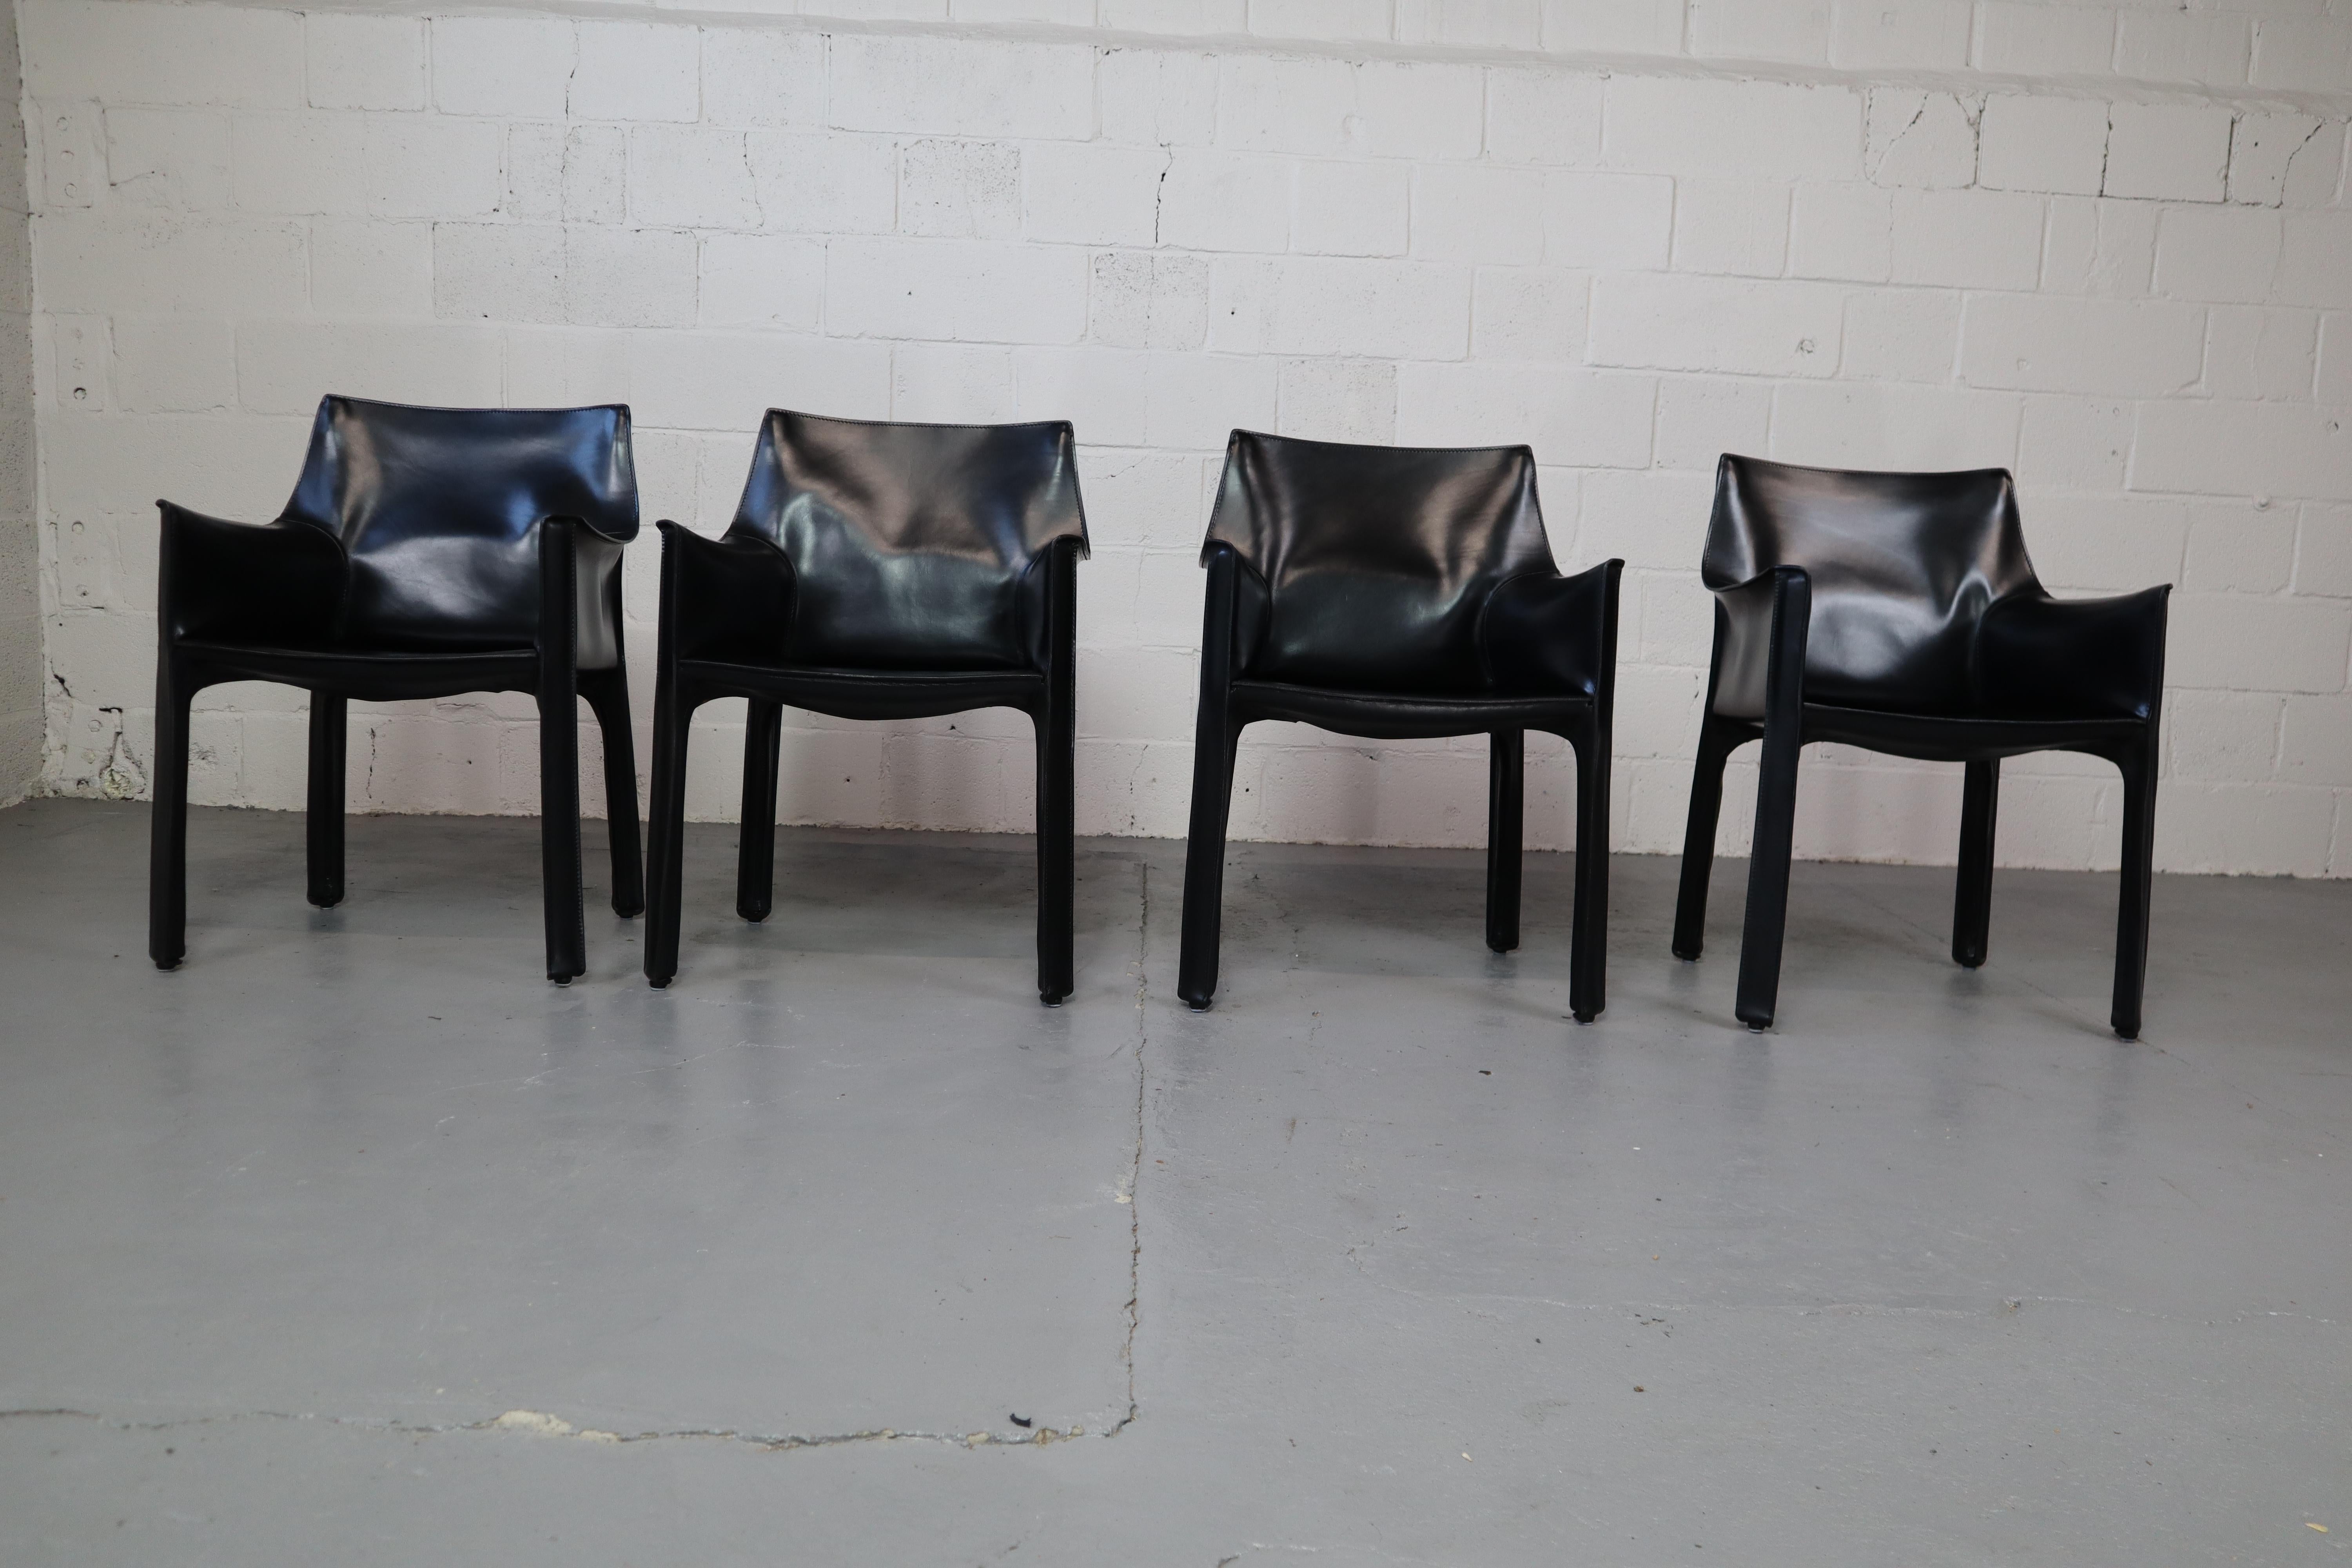 Set of four iconic Cab 413 armchairs in original black leather. Designed by Mario Bellini for Cassina in 1979!

The Cab chair is built up as a tubular frame over which thick saddle leather is fitted; the leather skin is kept in place with zippers on